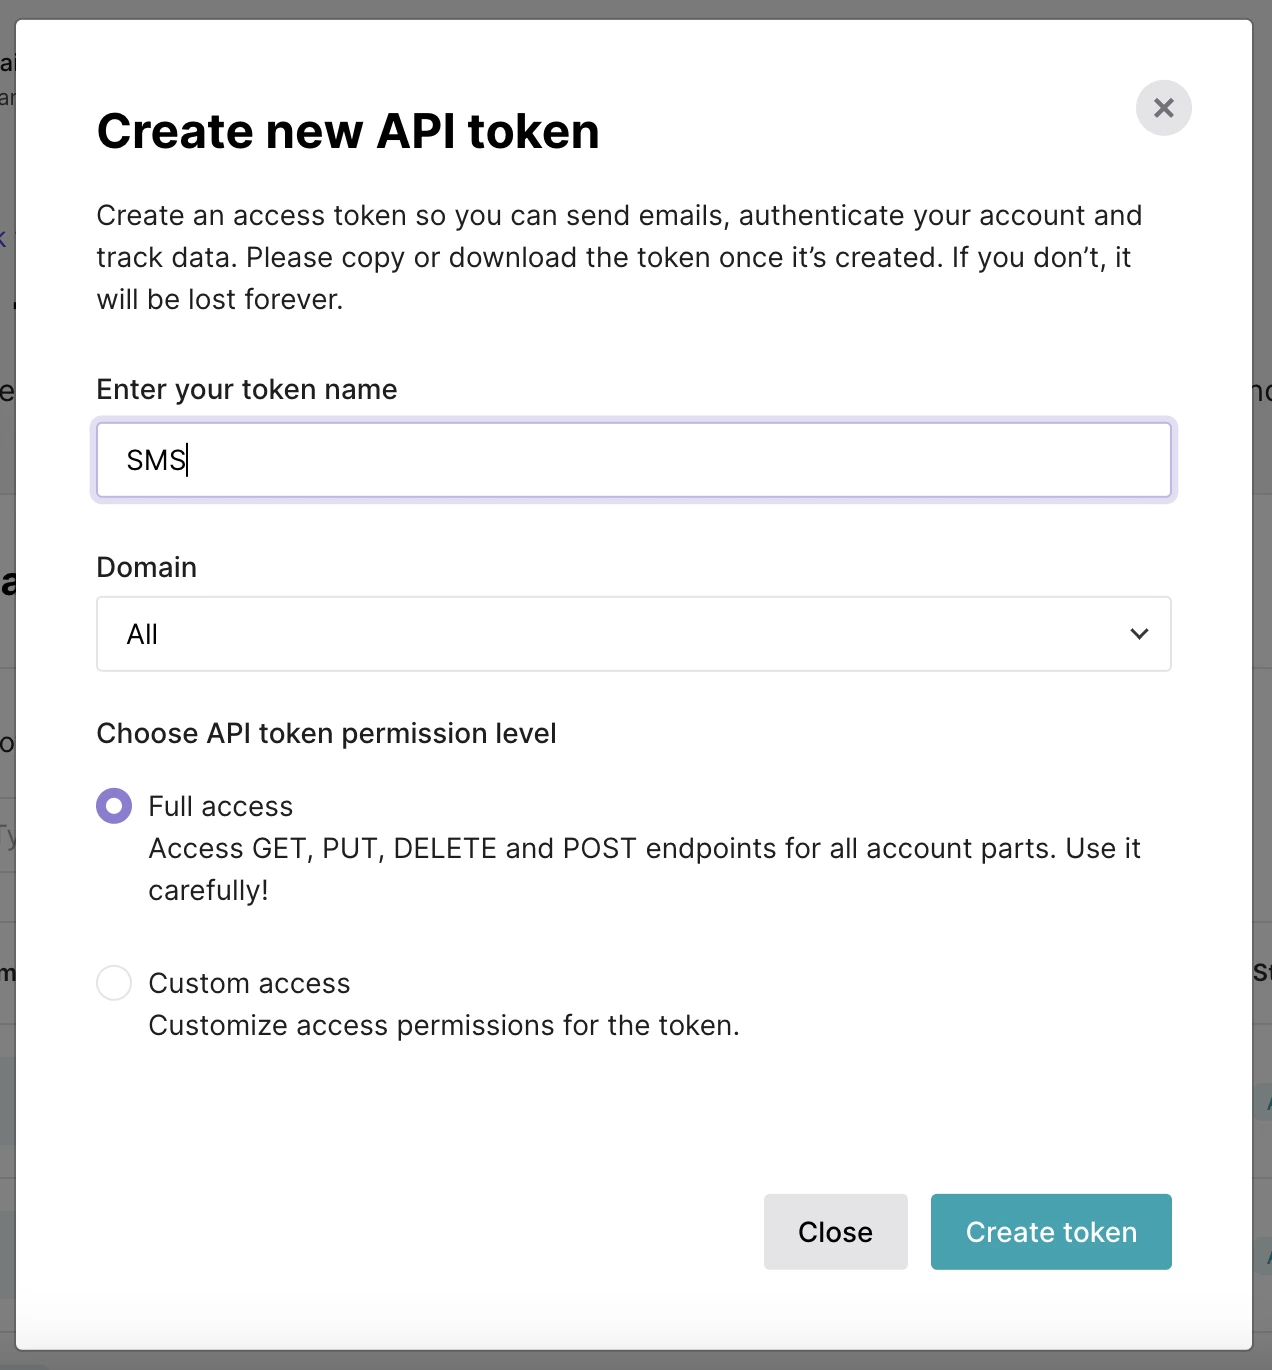 Create a new API token modal in the MailerSend app.